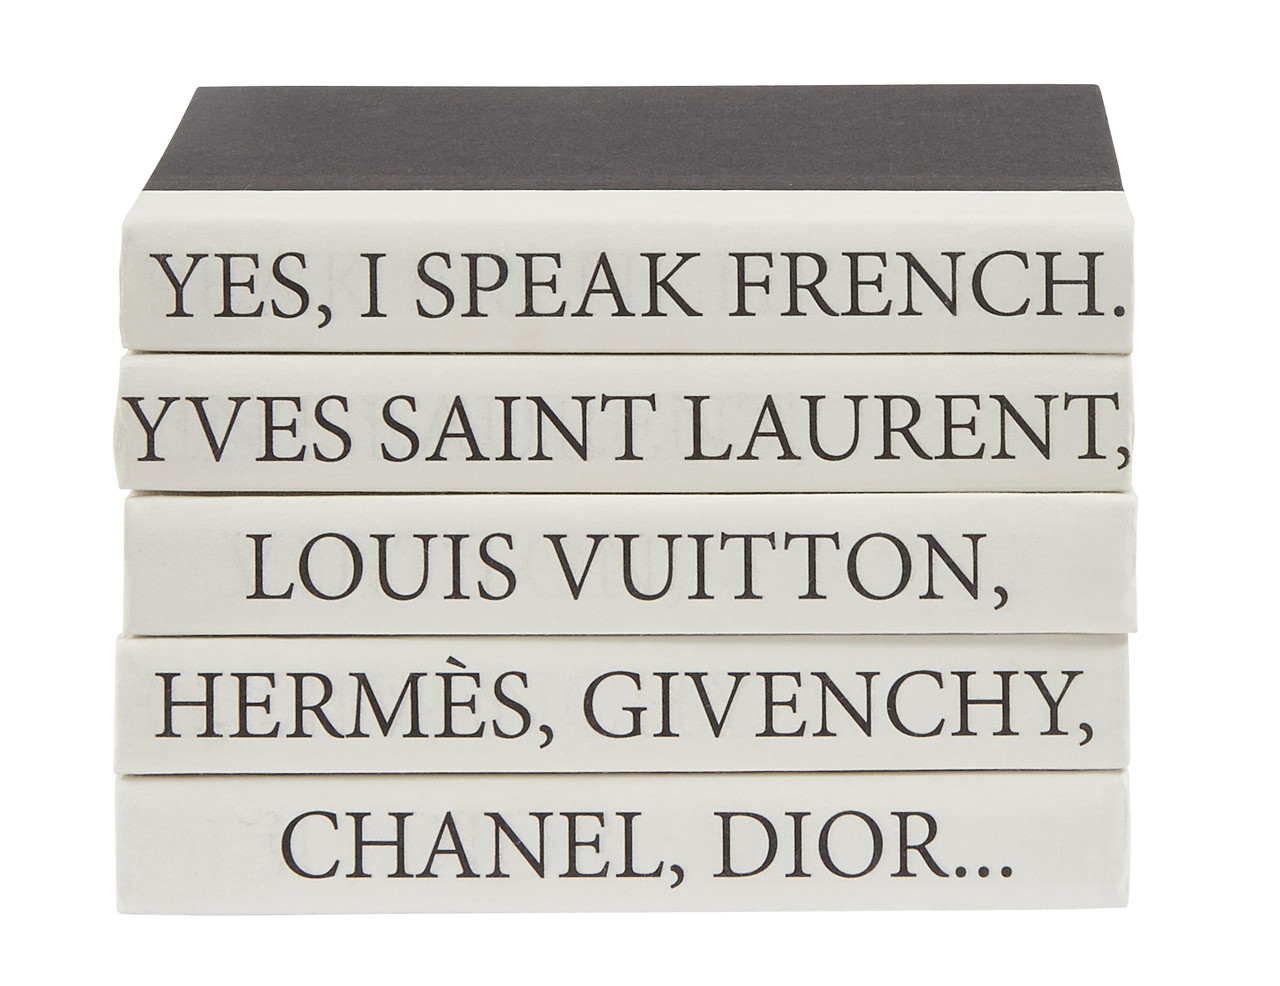 Decorative book stack with I Speak French quote on Muted